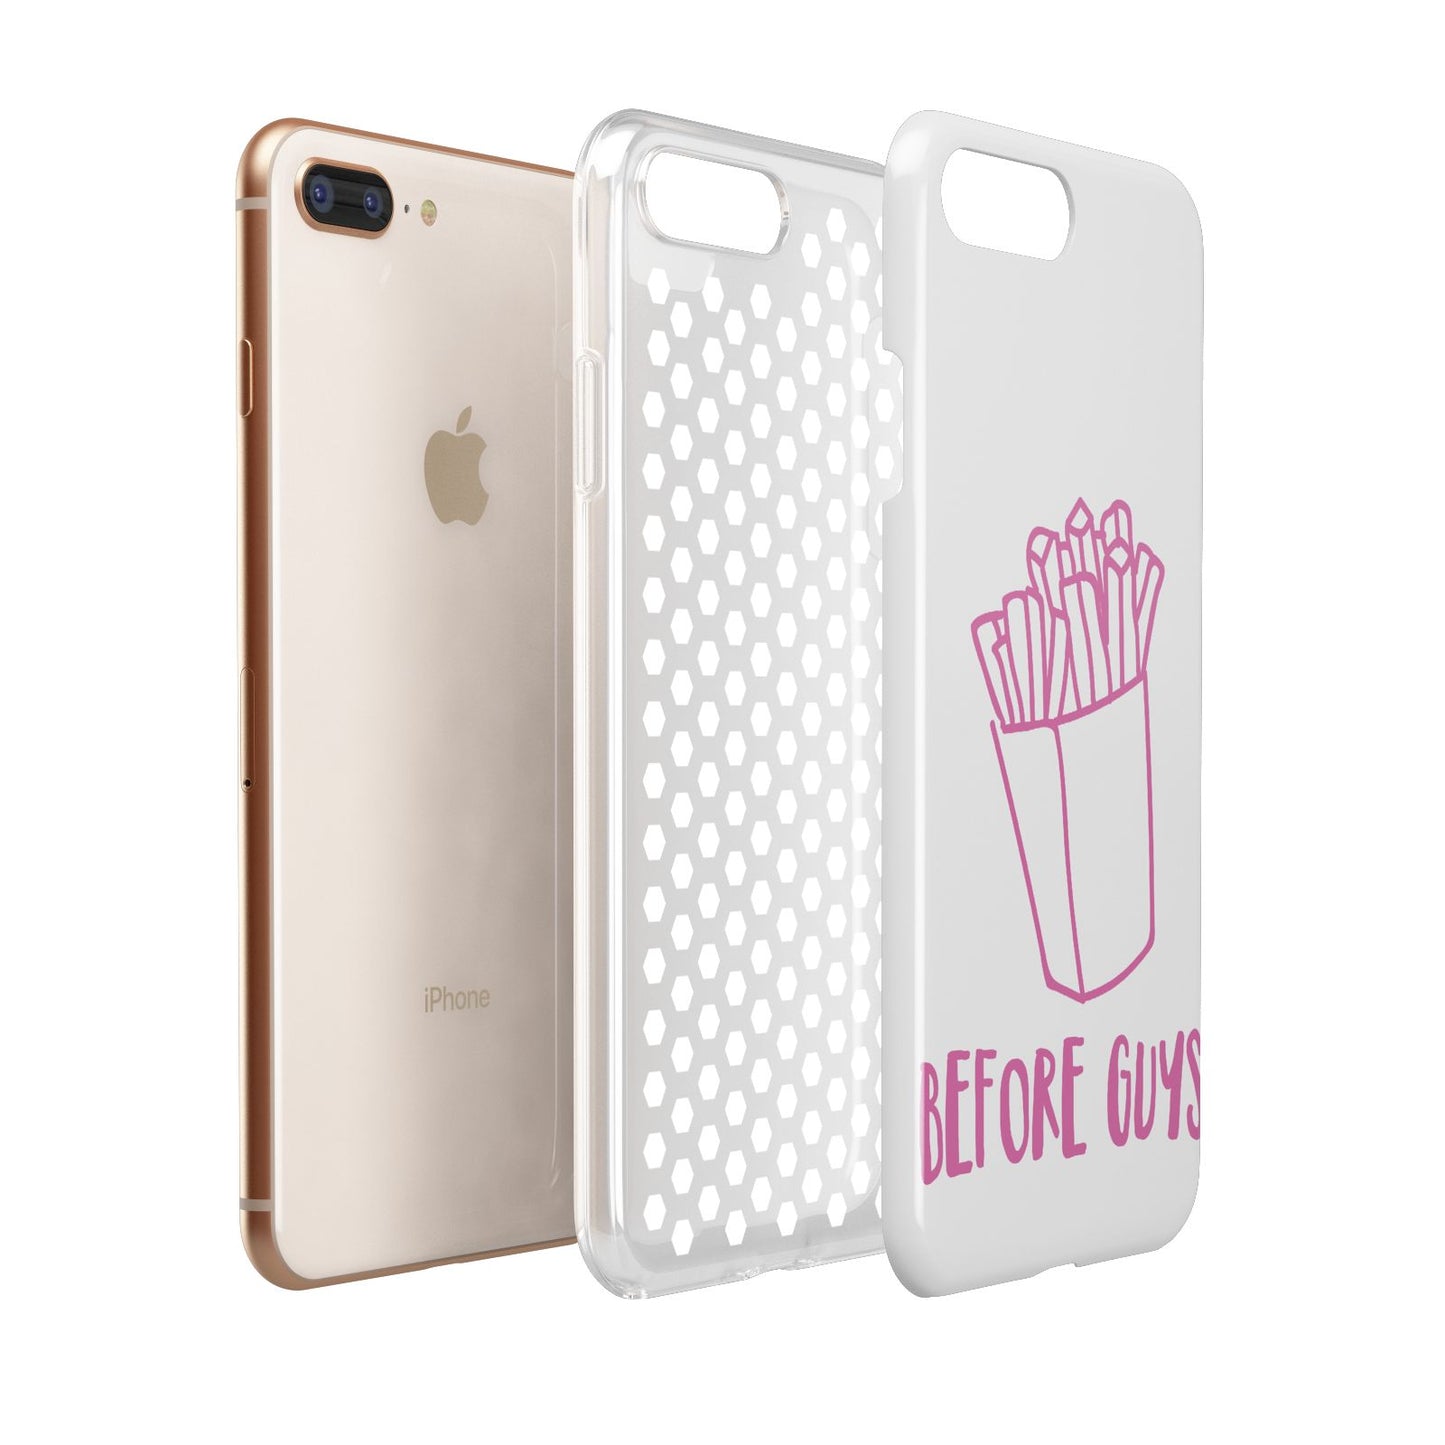 Valentines Fries Before Guys Apple iPhone 7 8 Plus 3D Tough Case Expanded View